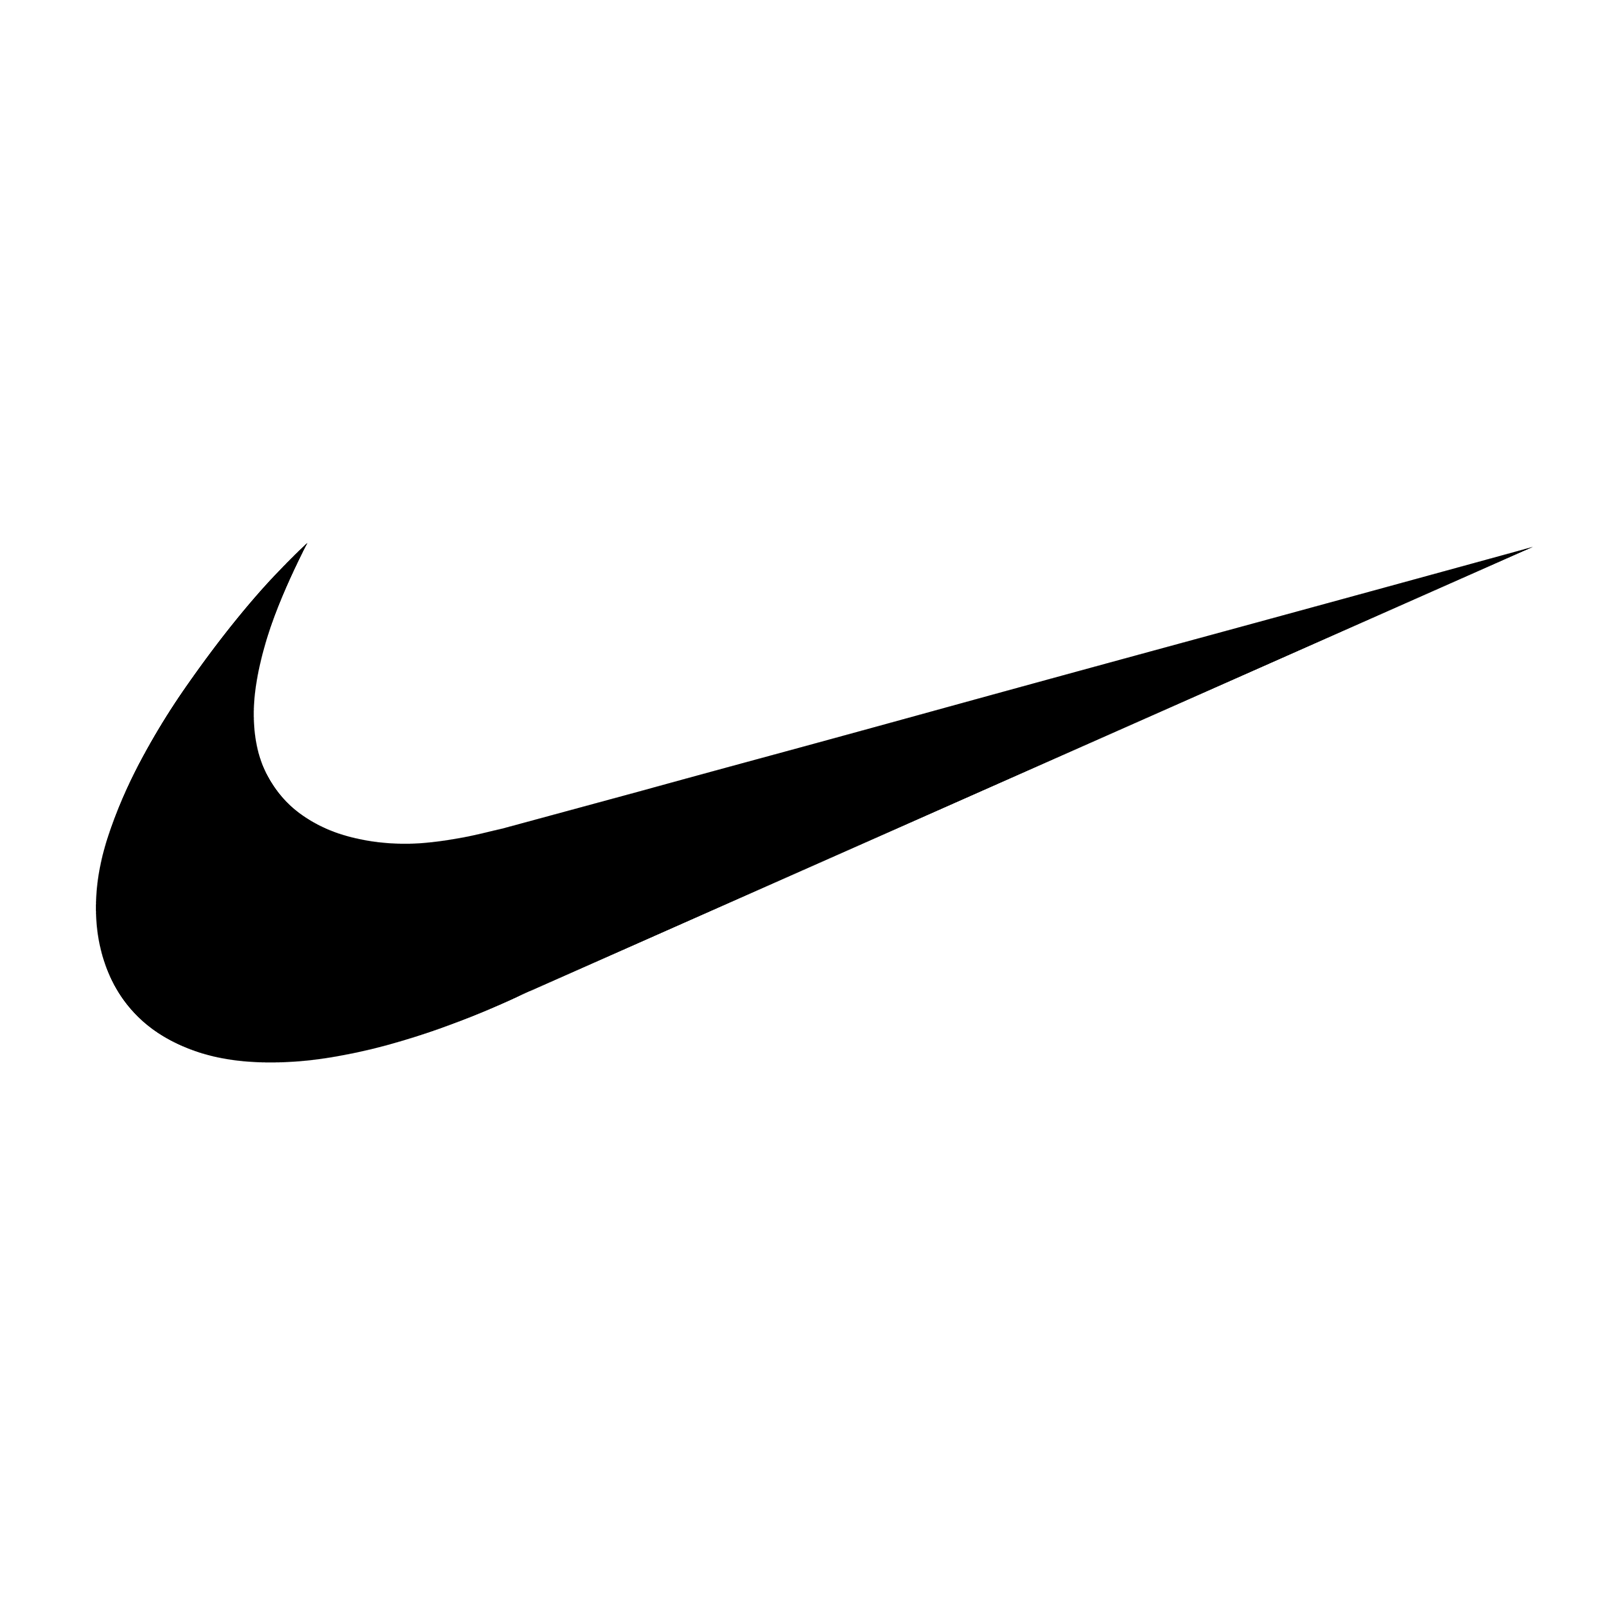 be a nike product tester